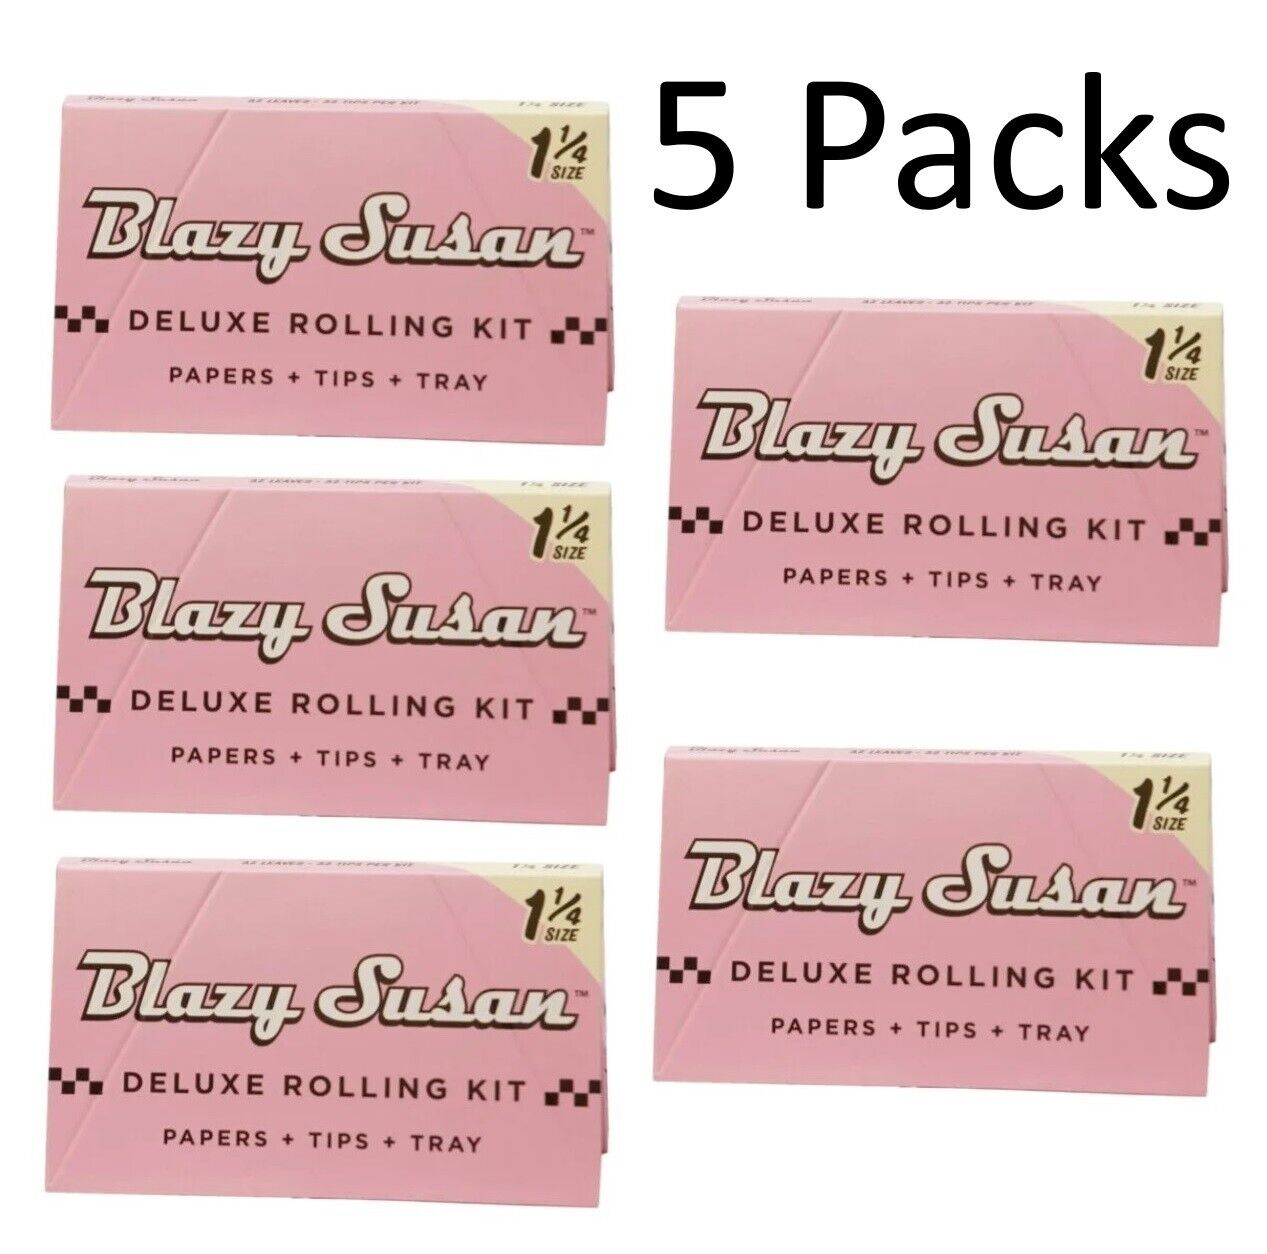 5x Blazy Susan Delux Rolling Kit - Papers + Tips + Tray (Pink) 1 1/4